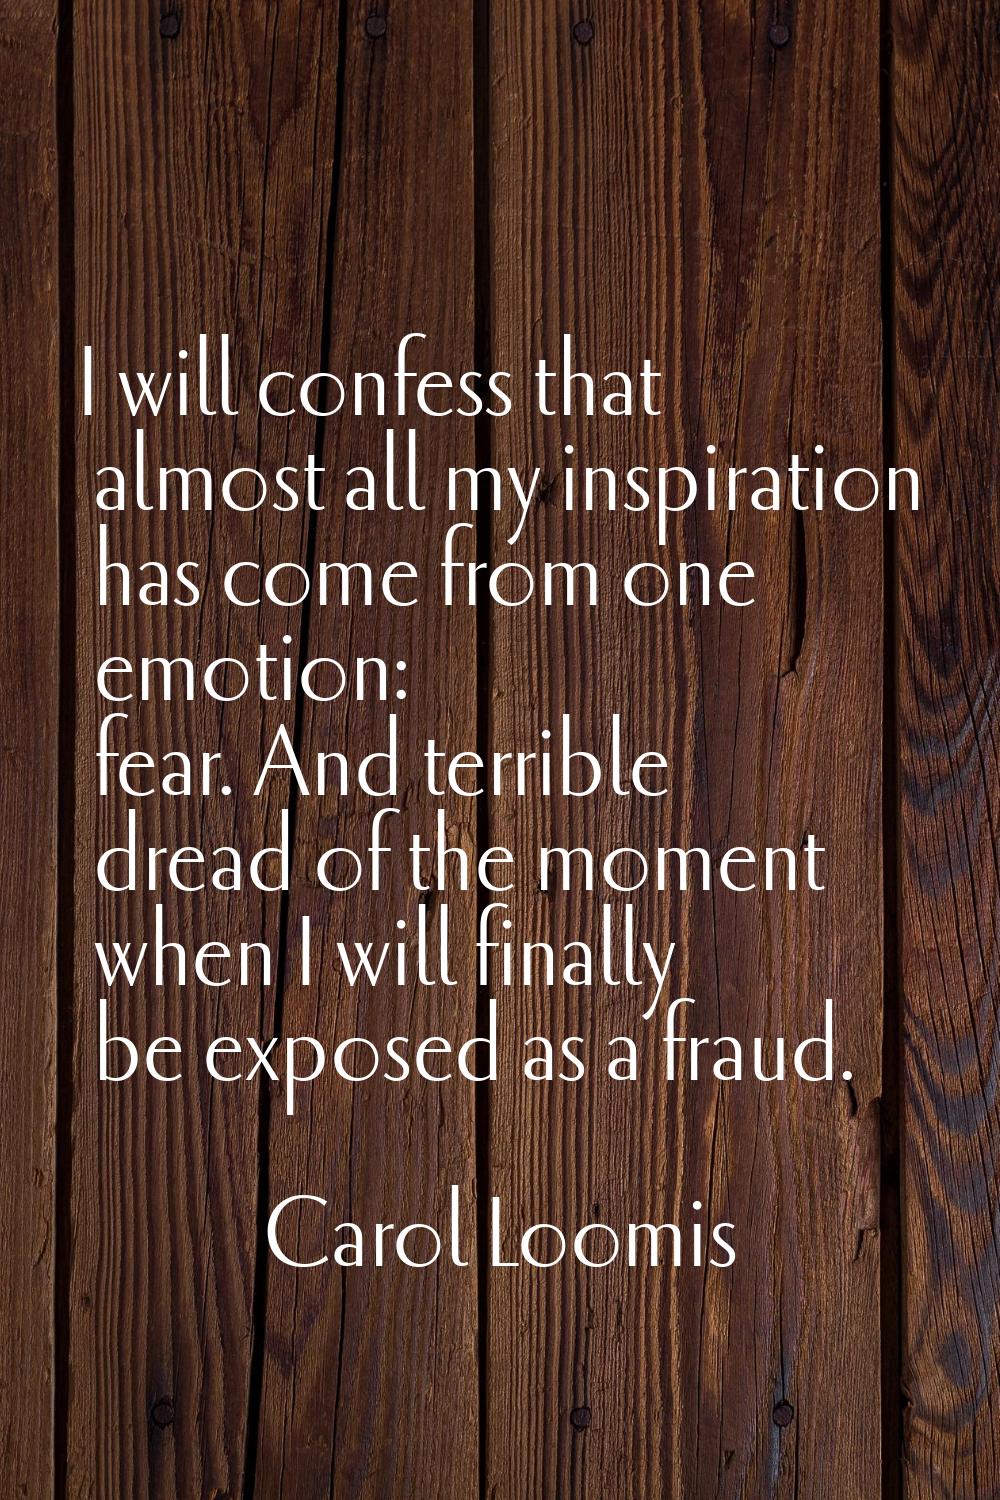 I will confess that almost all my inspiration has come from one emotion: fear. And terrible dread o